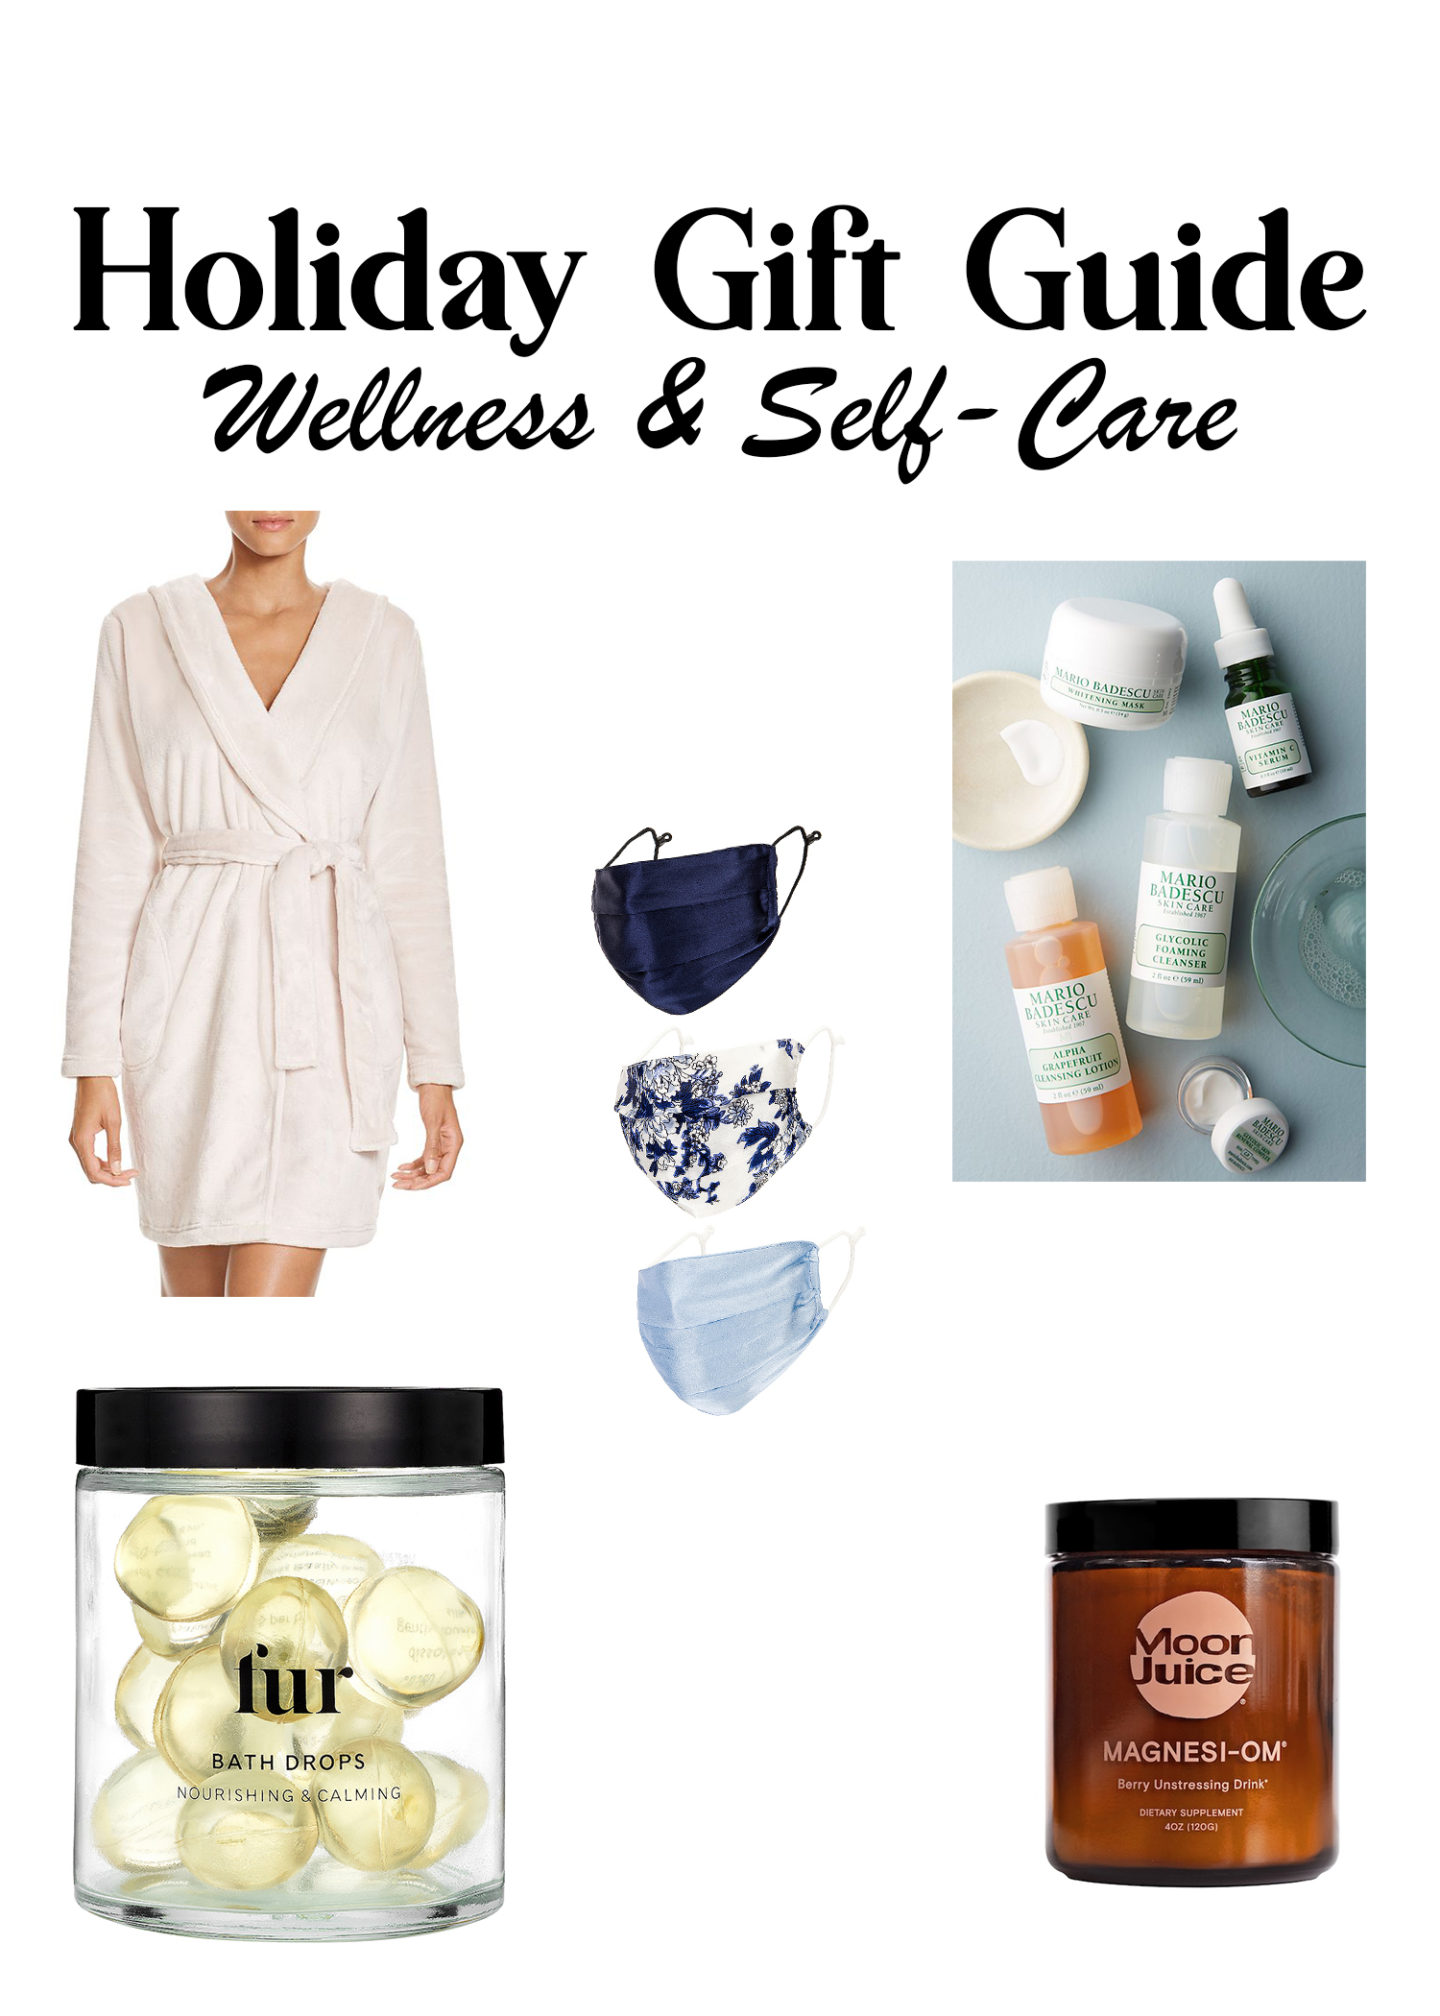 Holiday Gift Guide: Wellness & Self-Care